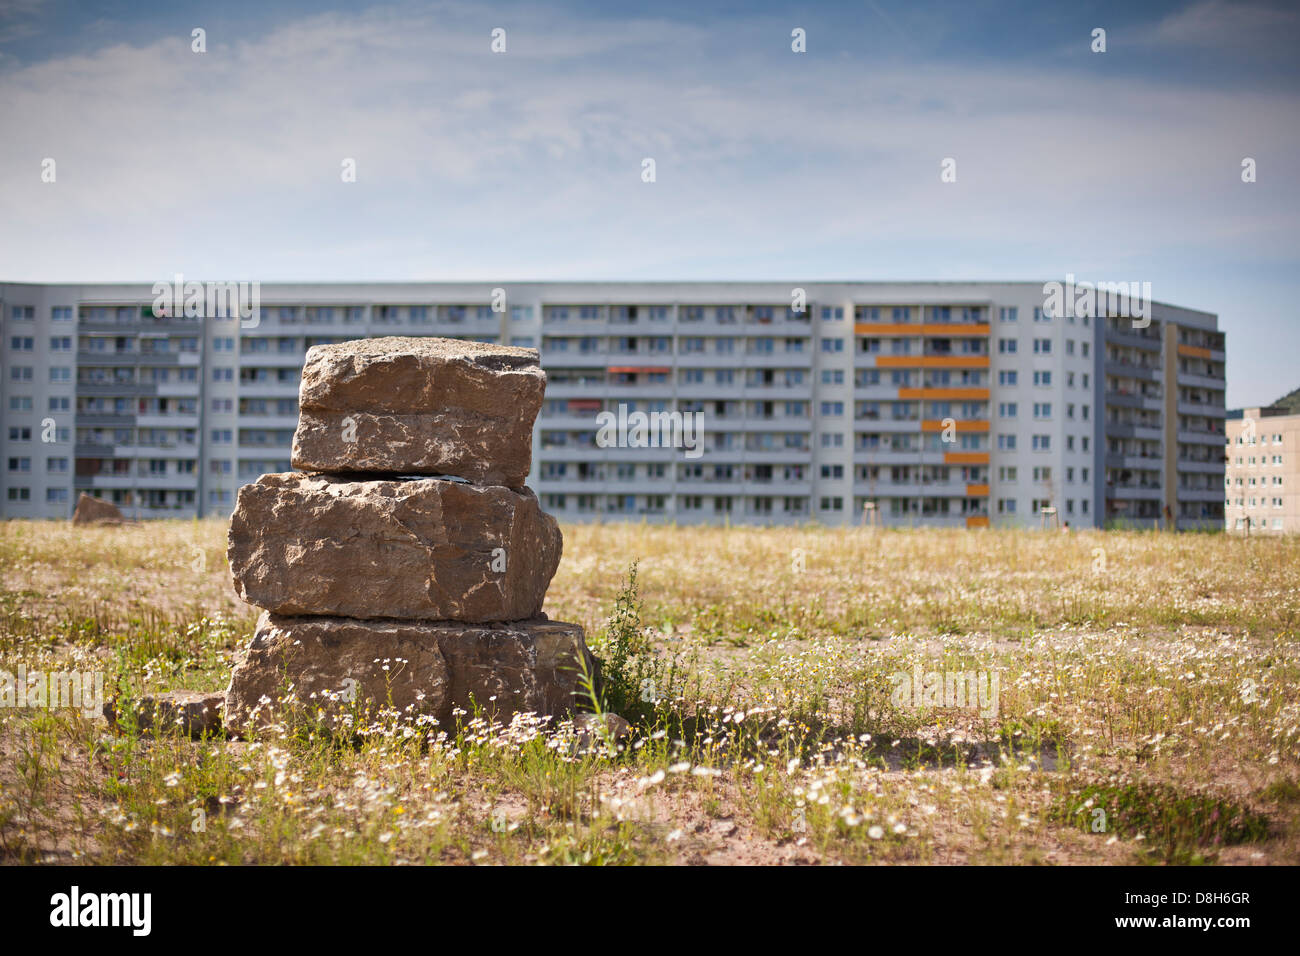 Stacked stones in front of prefabricated buildings, Jena, Thuringia, Germany Stock Photo